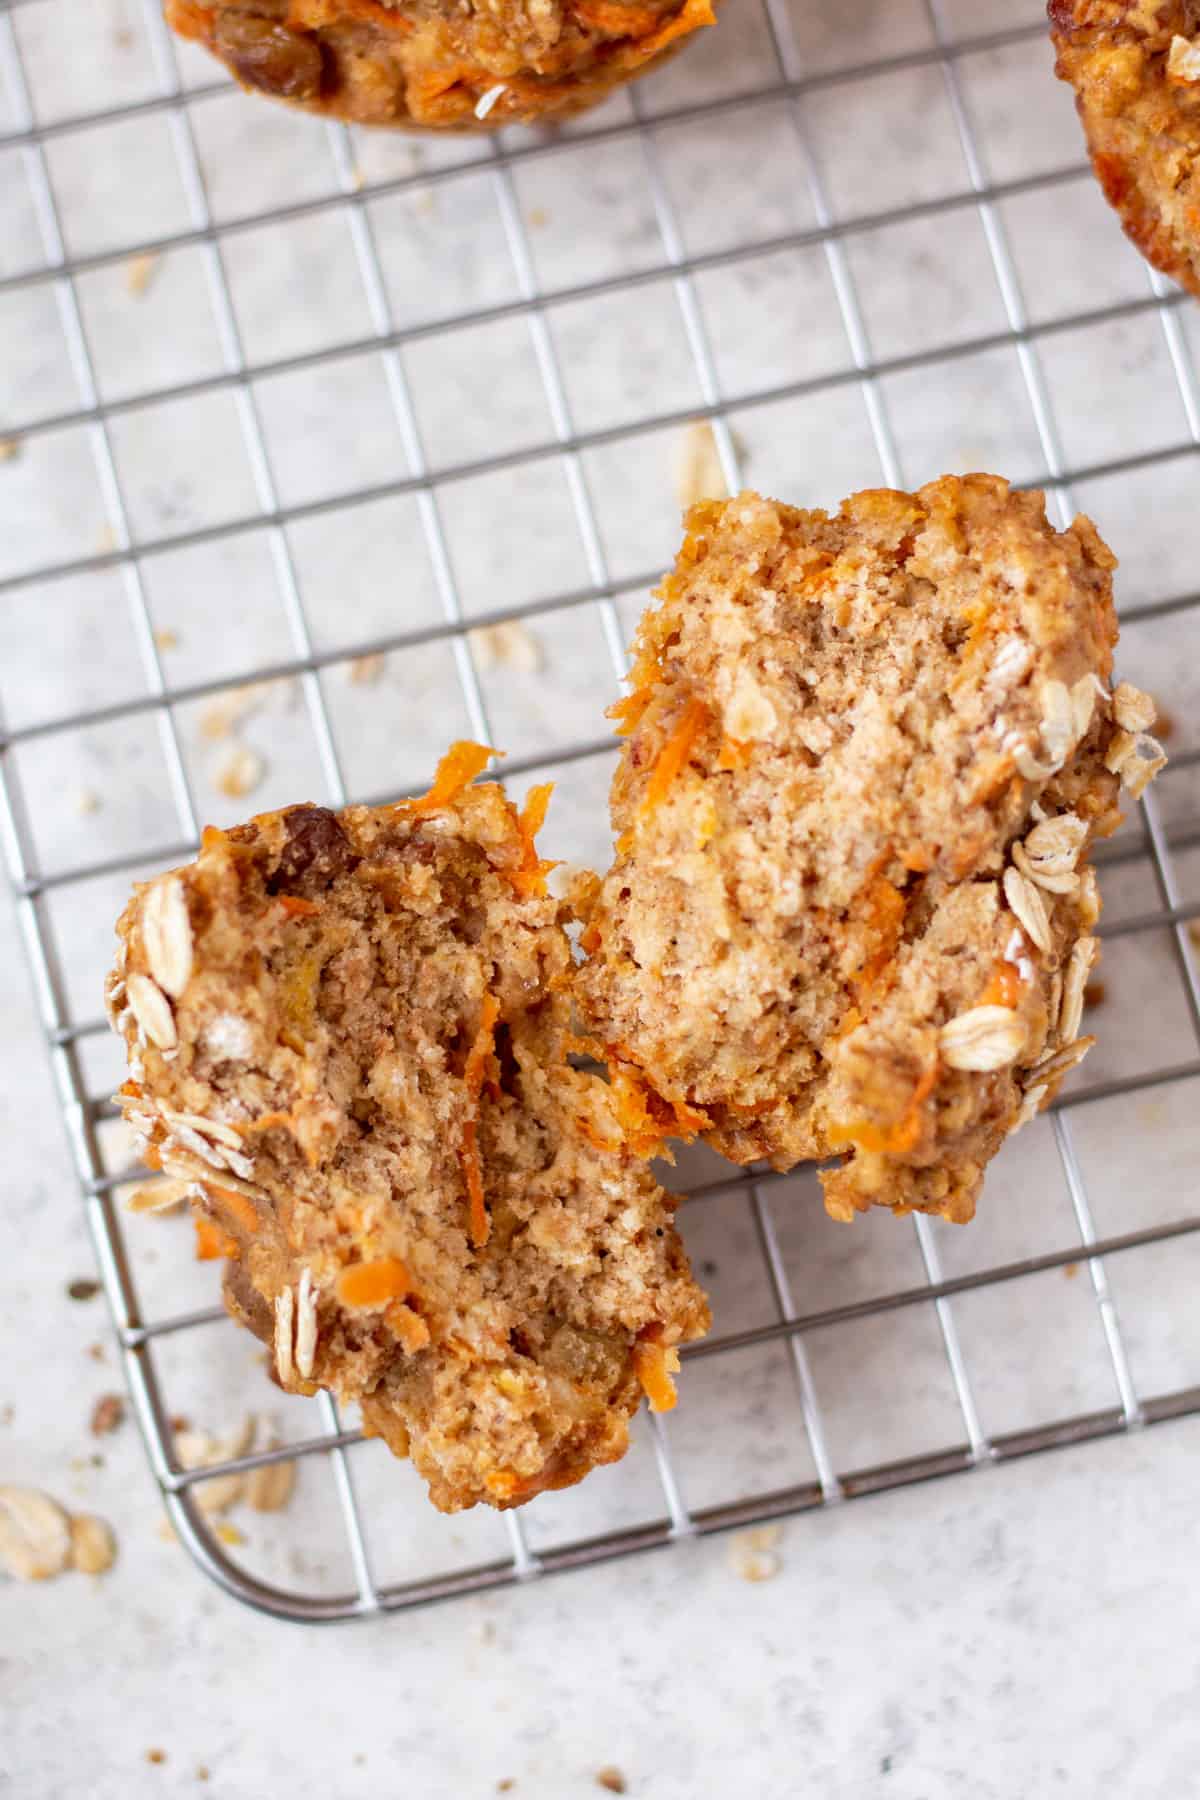 a sliced open carrot muffin on a cooling rack